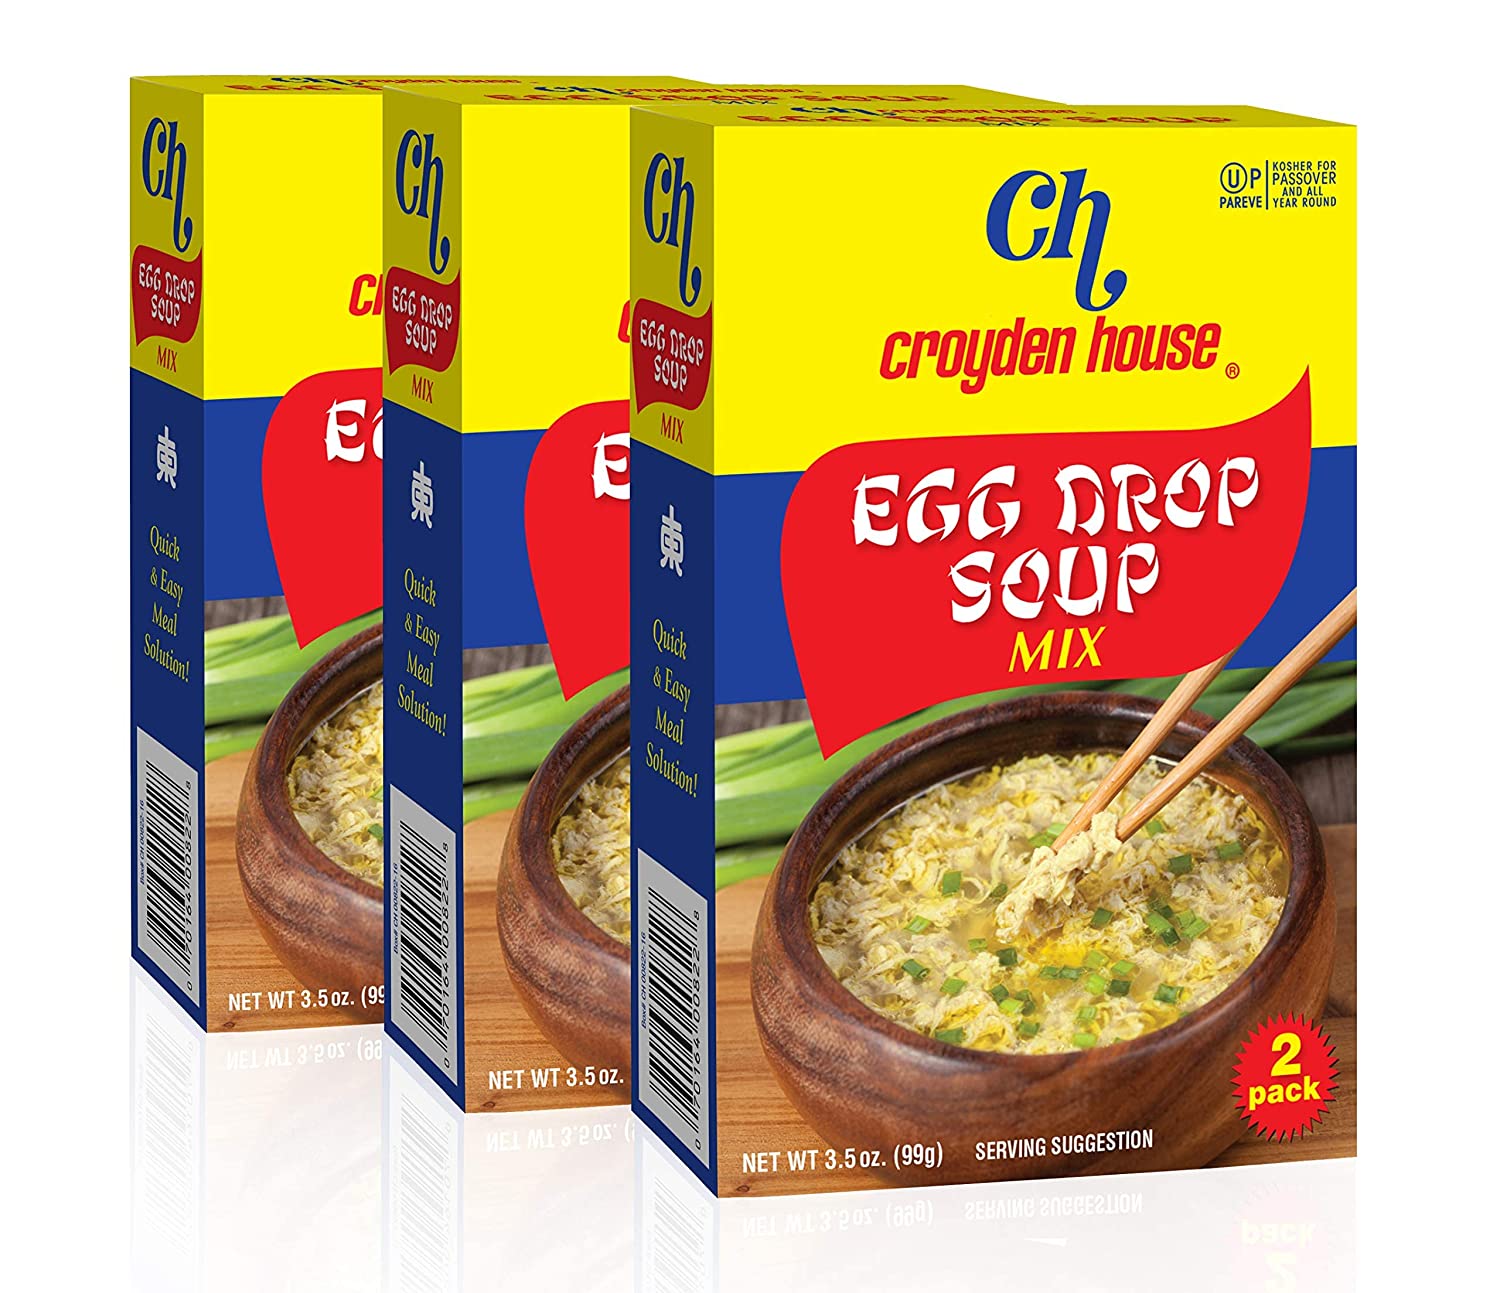 Croyden House Egg Drop Soup Mix 3.5oz (3 Pack, Total of 6 Envelopes) Quick and Easy Prep, Chinese Style, Kosher